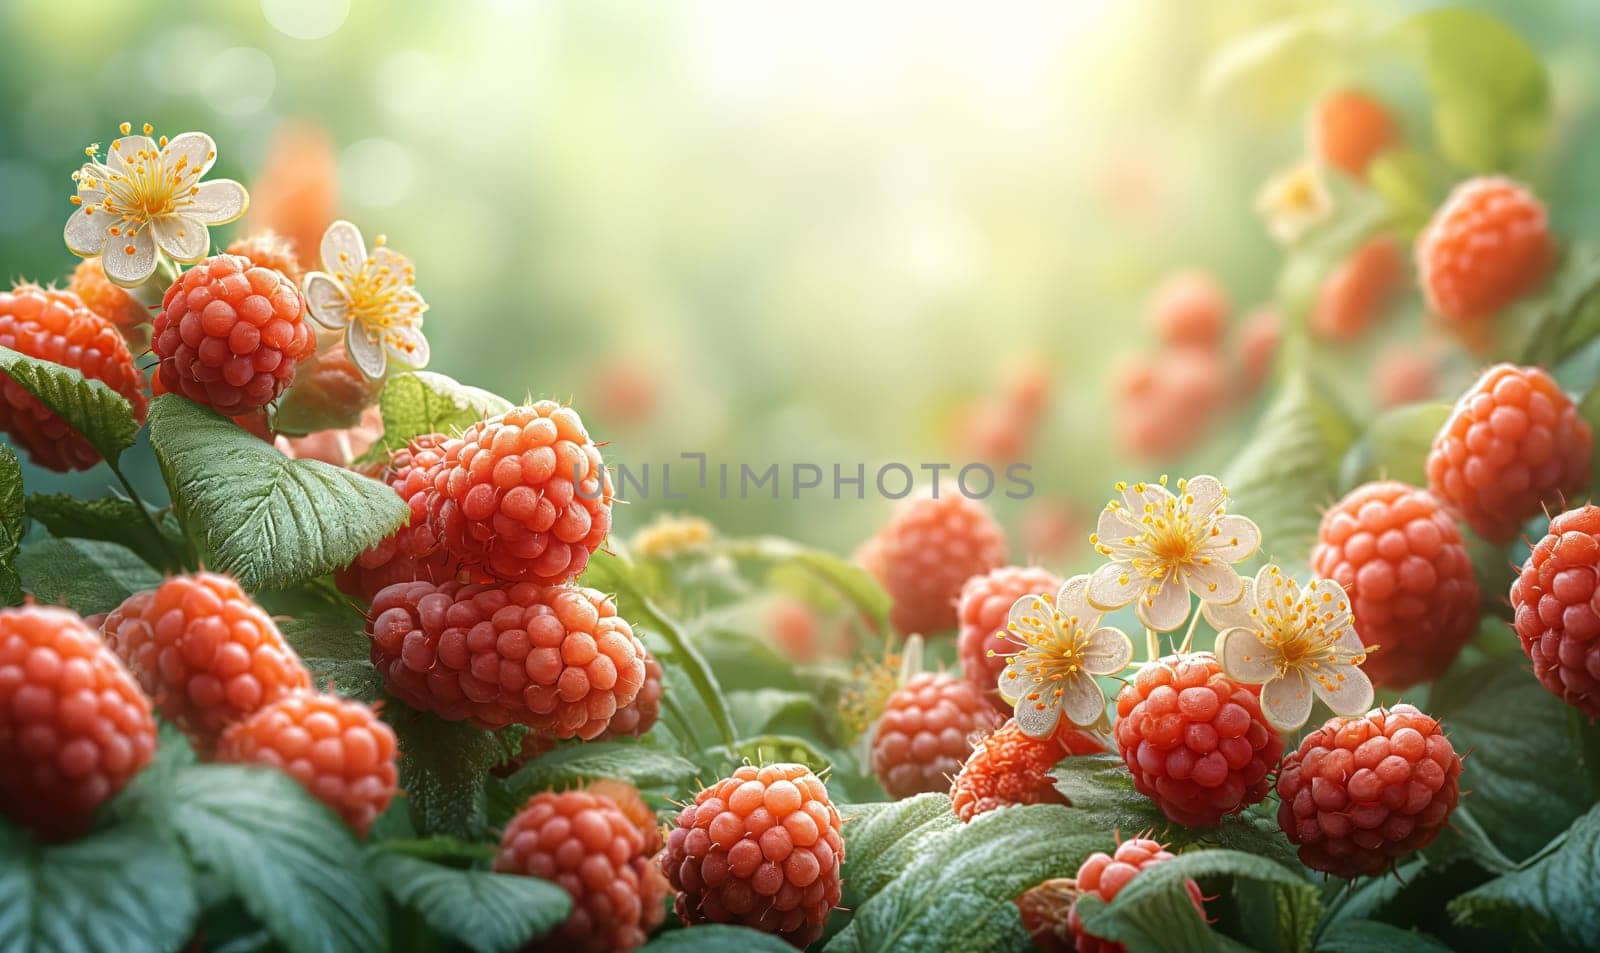 Raspberry berries and white flowers in sunlight. Selective soft focus.